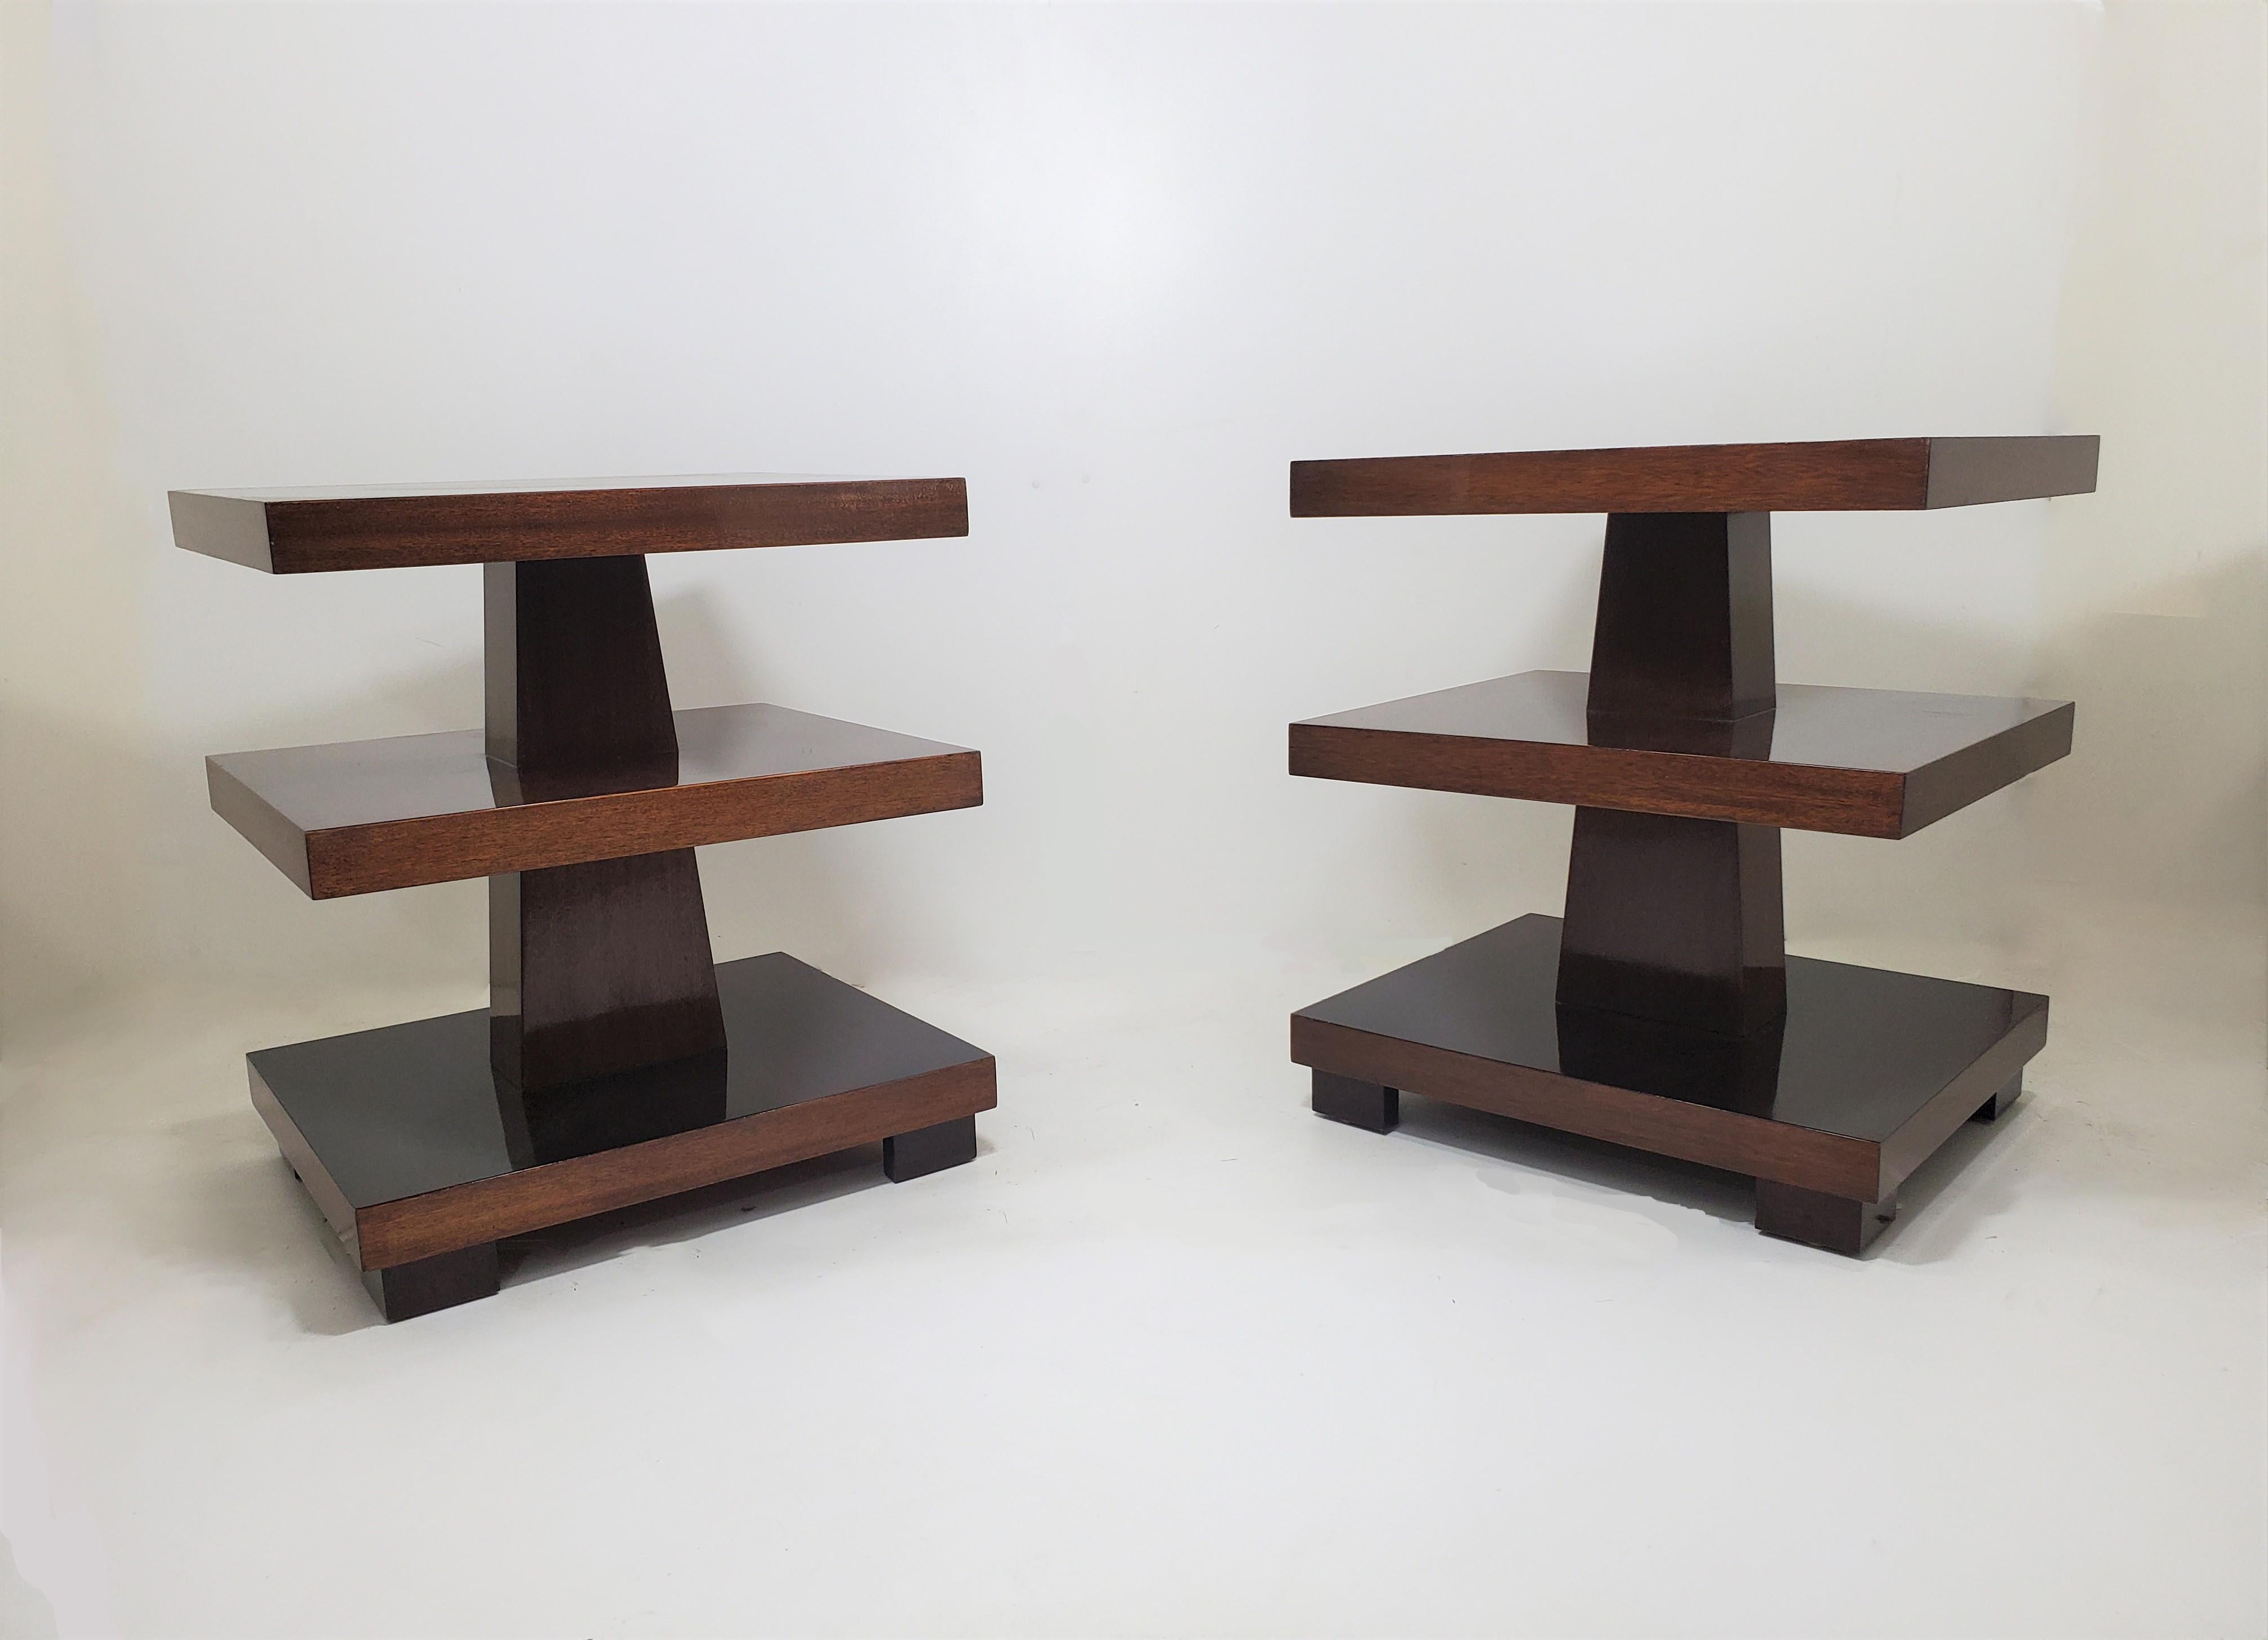 A pair of elegant and imposing highly sculptural, Art Deco rectangular three tiered tables of cubist design in a deep cognac /dark amber colored mahogany with central shaft dissecting the shelves and the whole raised on cube feet.
The angular form